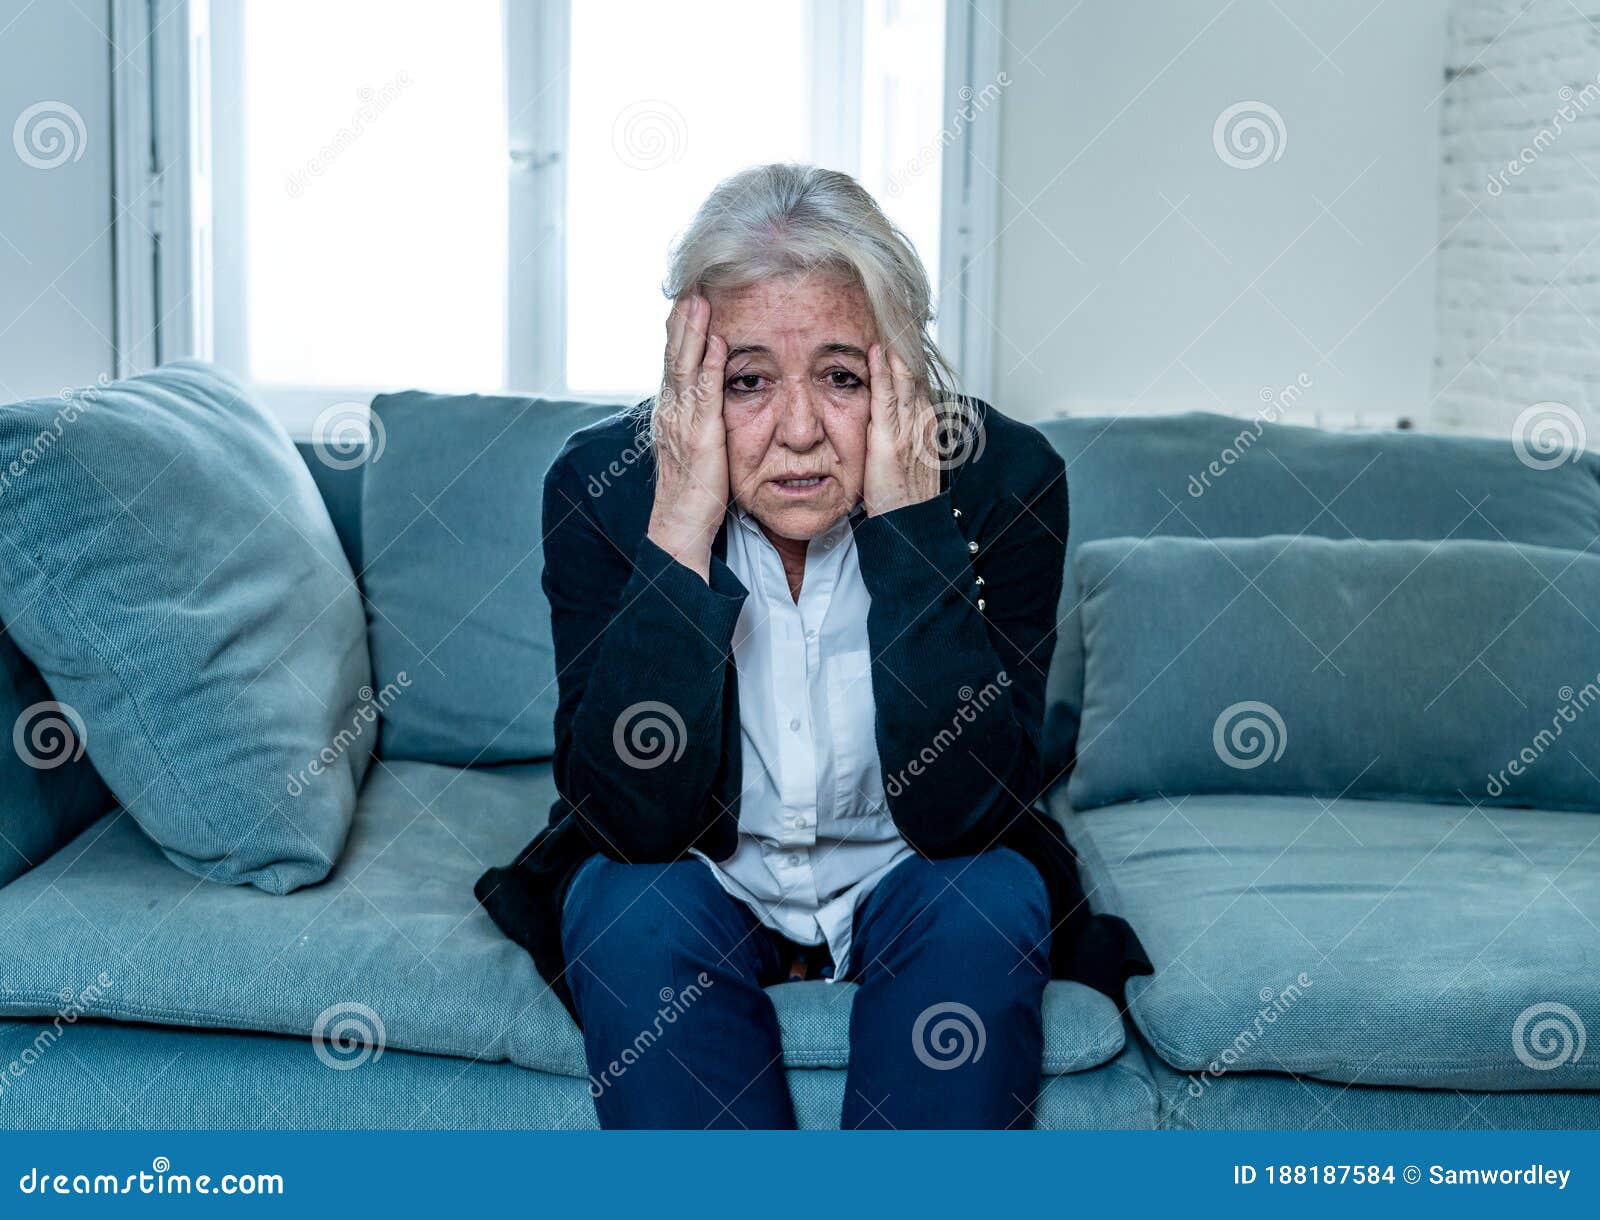 Senior widow woman lonely and sad feeling depressed at home. Lonely depressed senior old widow woman crying on couch in isolation at home, feeling sad and worried missing husband and family in COVID-19 Outbreak, lockdown, social distancing and Mental health